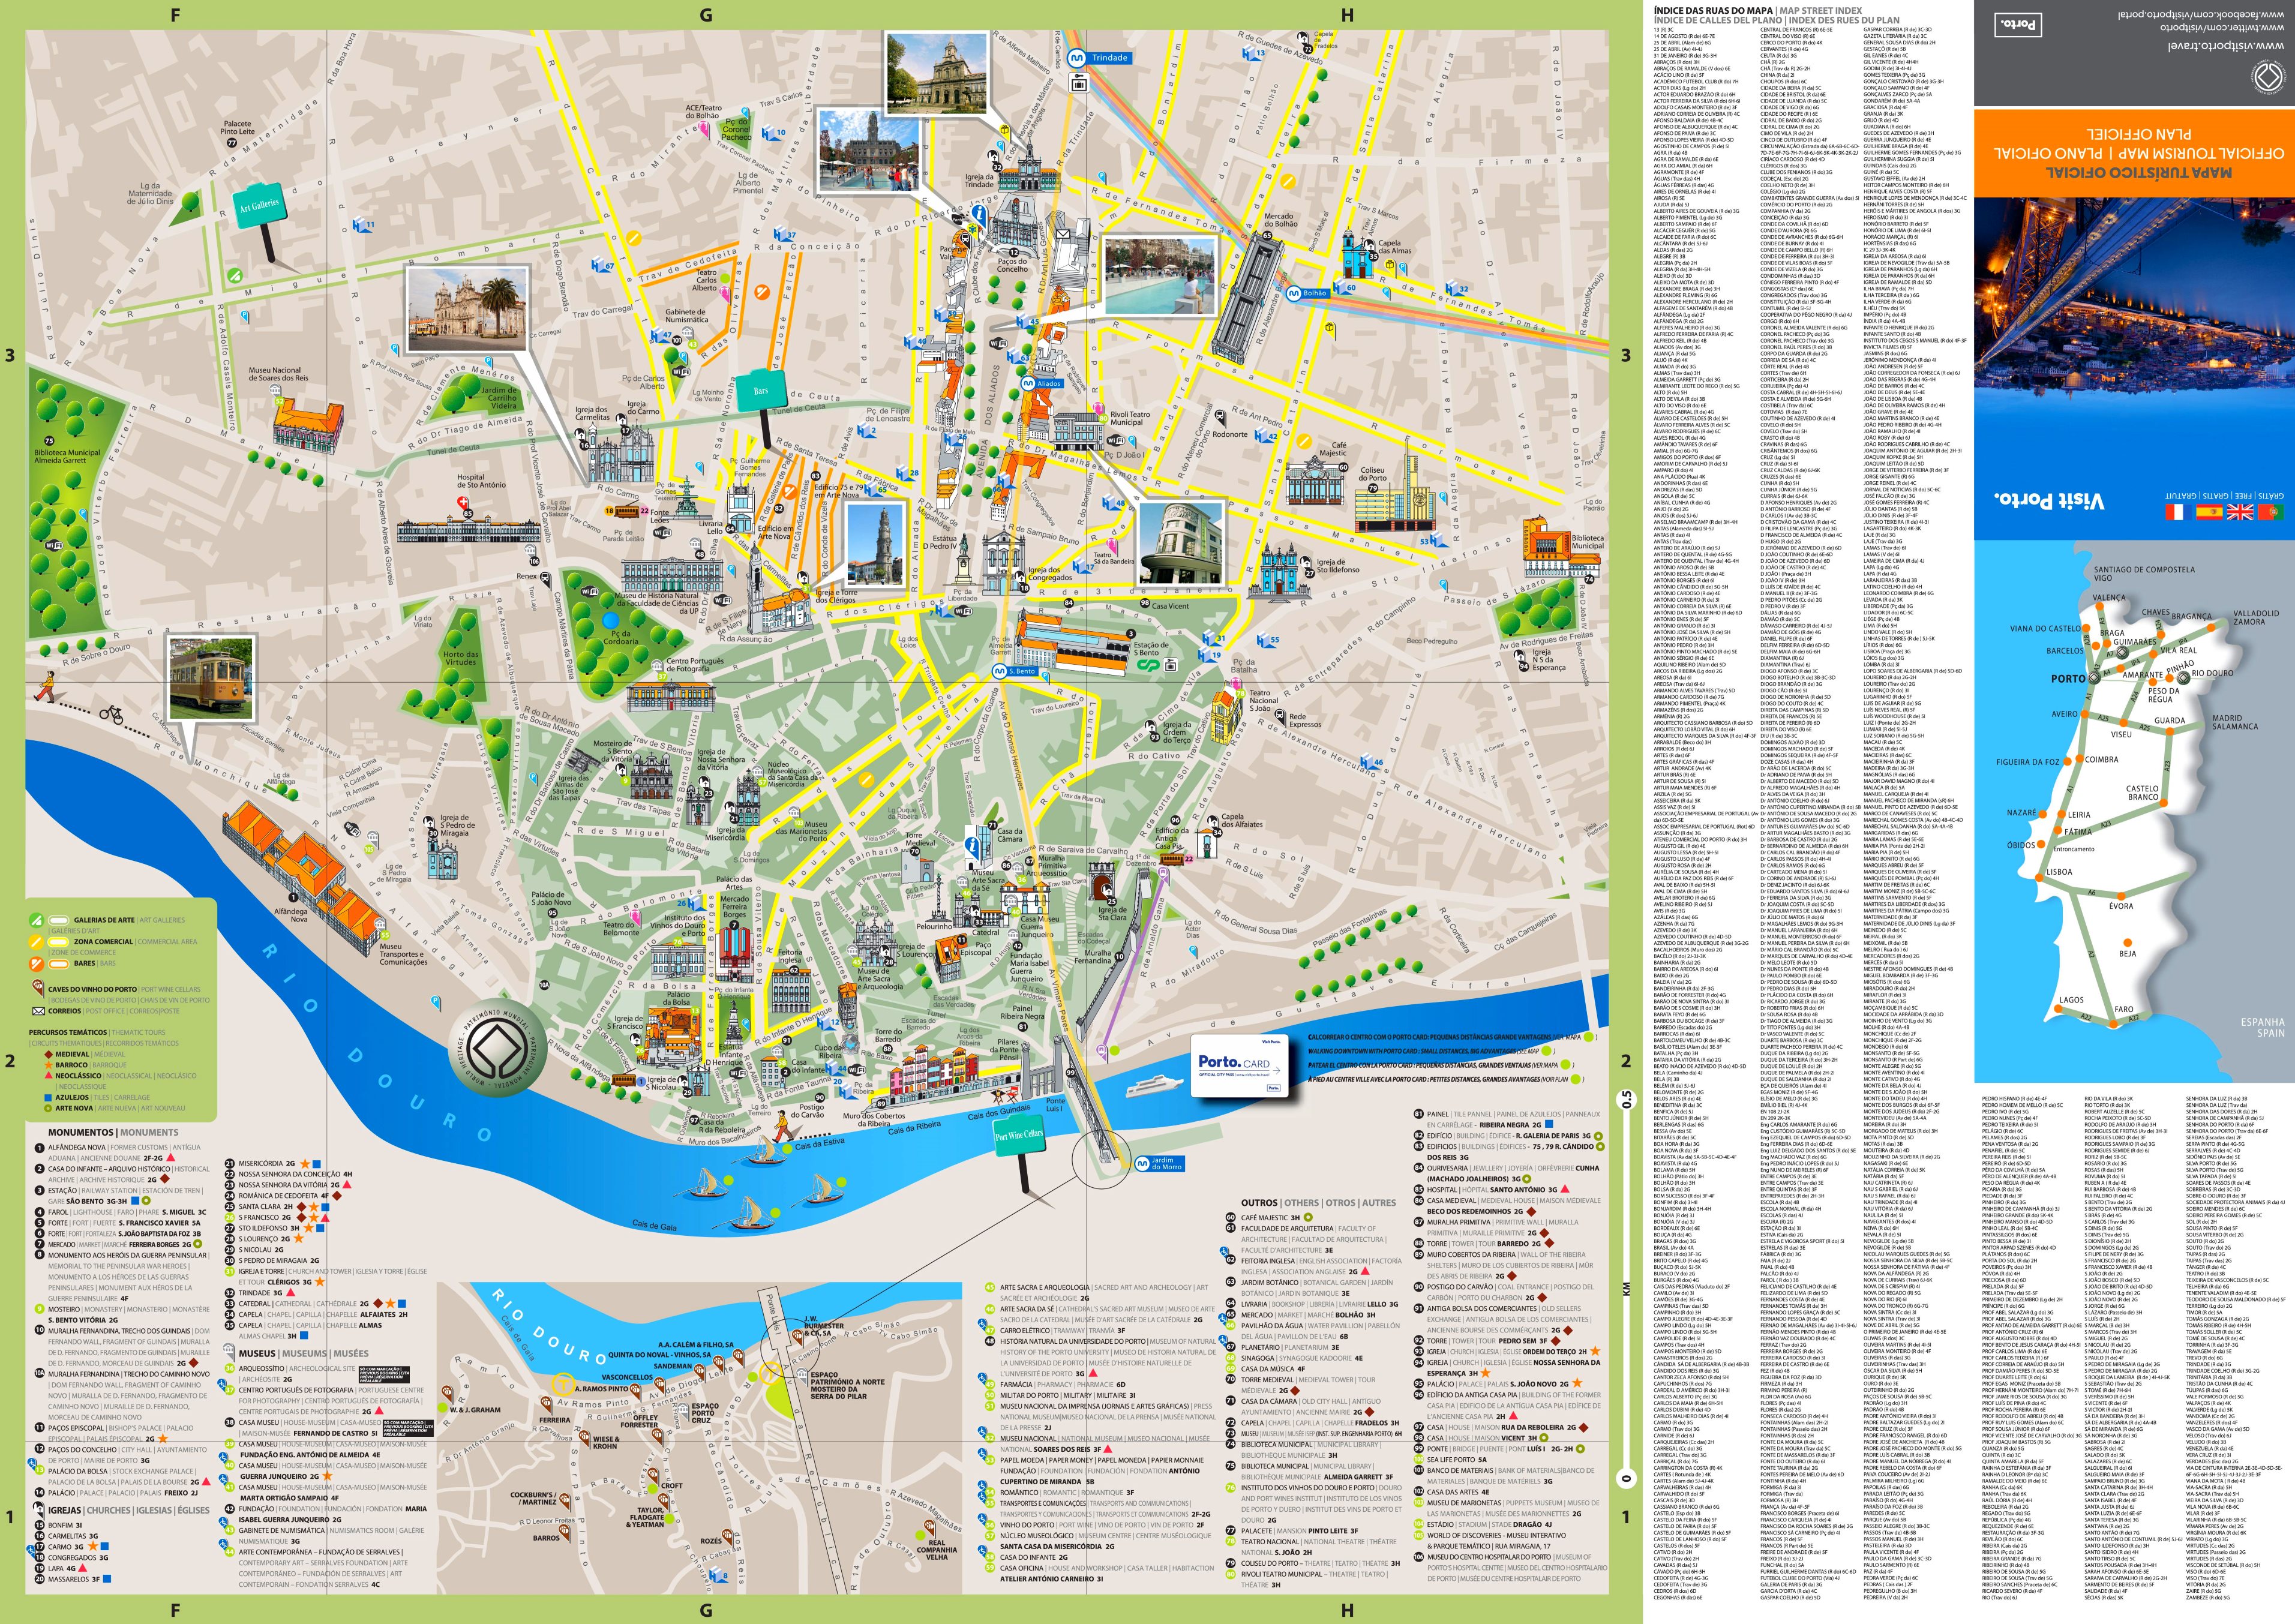 Portugal - PDF tourist map - tourist attractions, What to see? Guide.